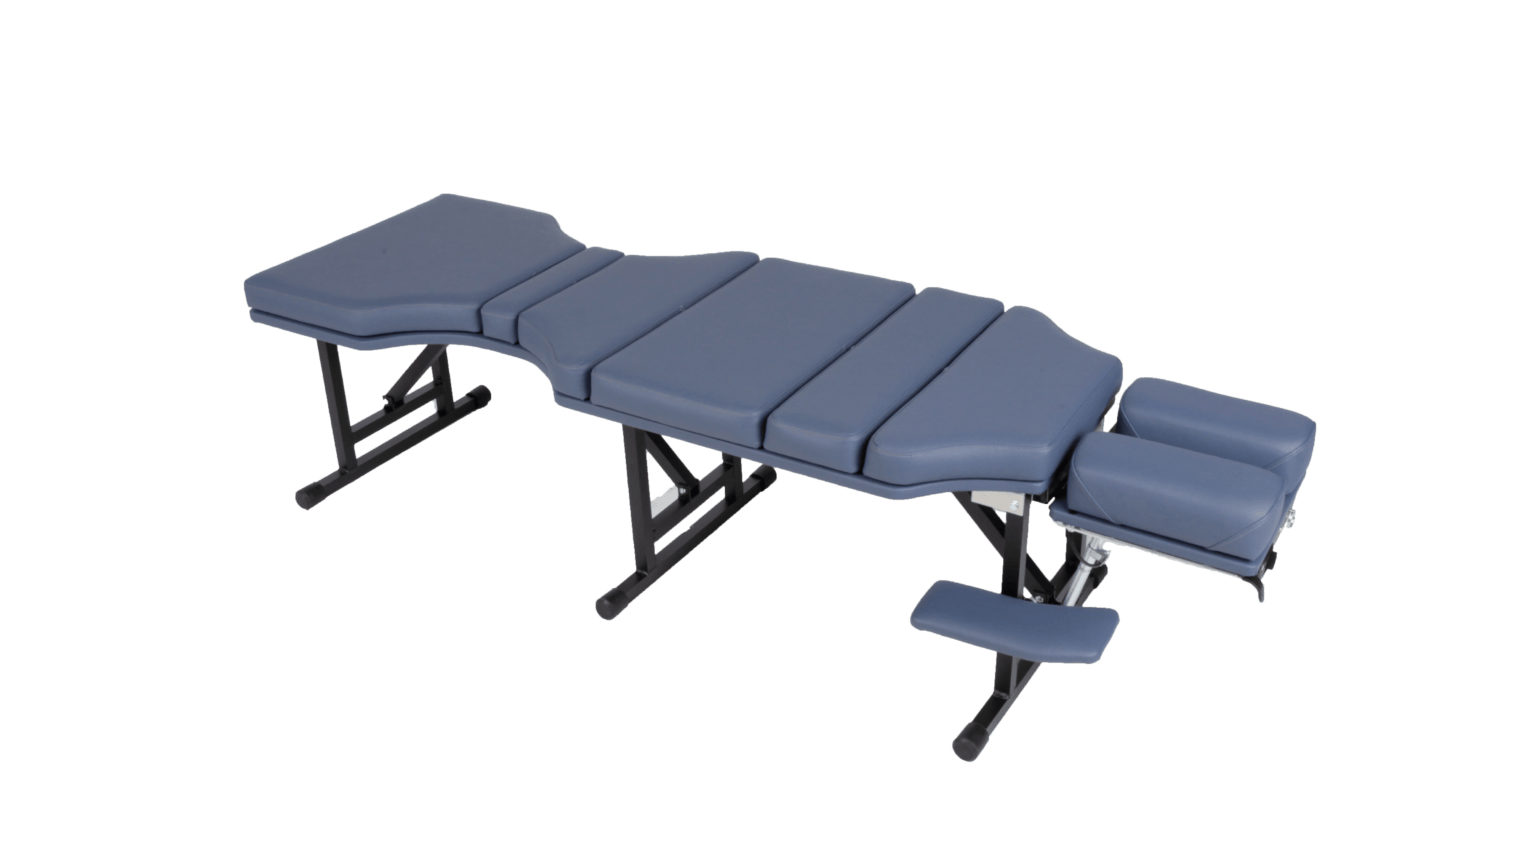 Lifetimer International LT-2002 Stationary Chiropractic, massage and physical therapy table ergonomic fixed leg height pivoting arm rests in blue